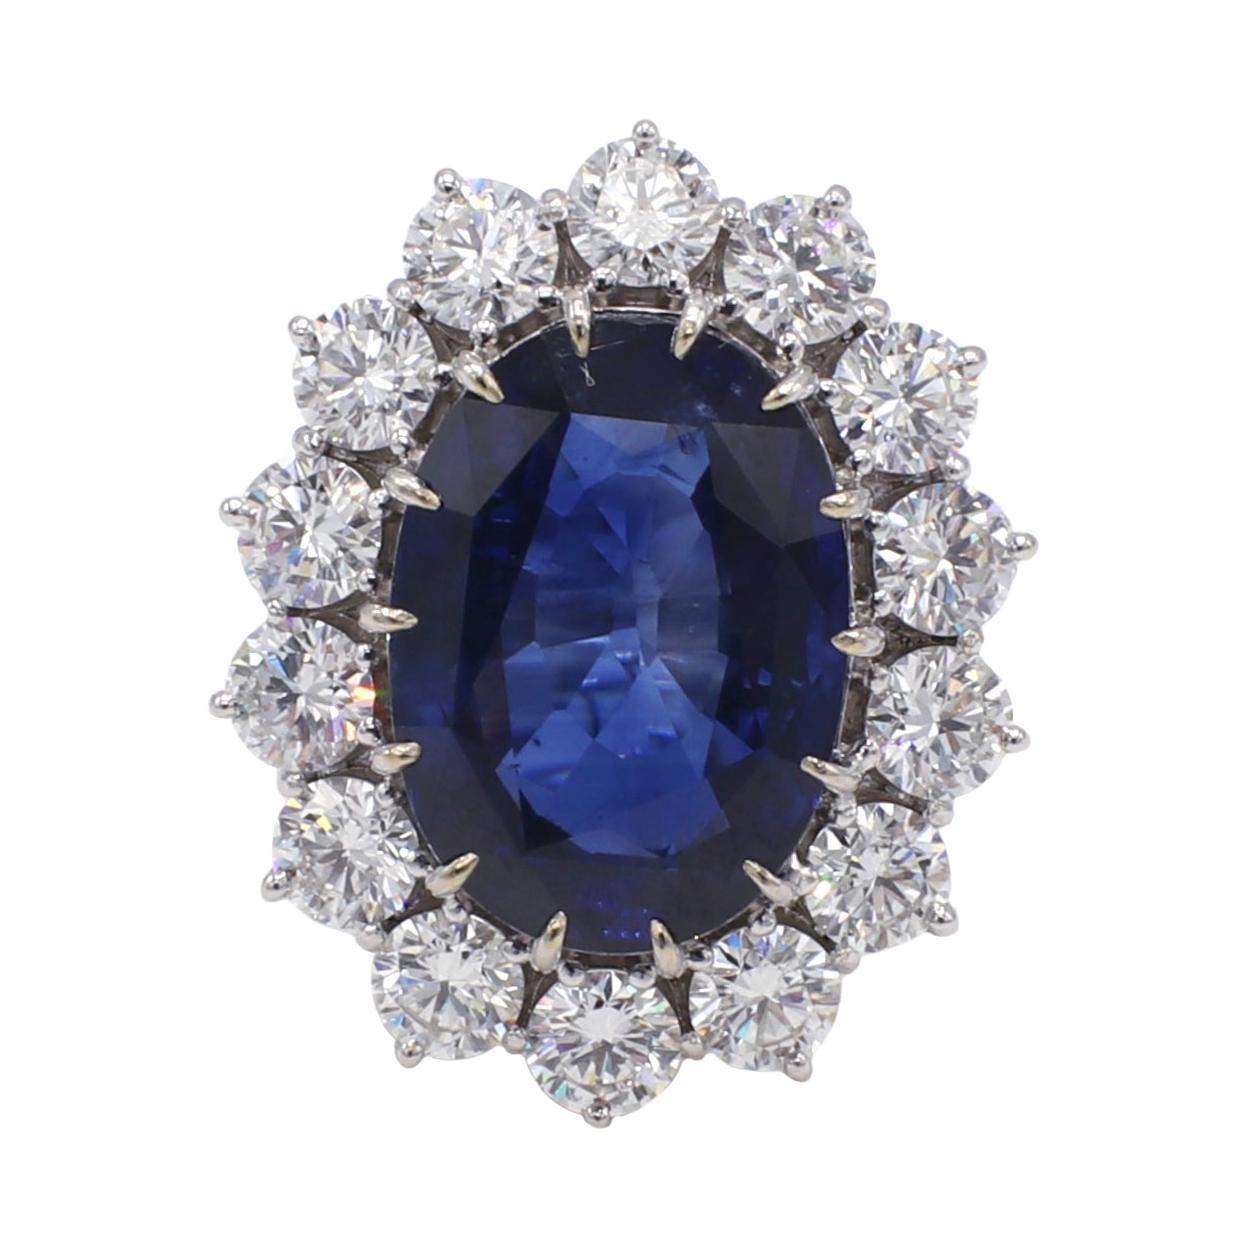 AGL Certified 7.09 Carat Blue Sapphire & Diamond Halo Cocktail Ring